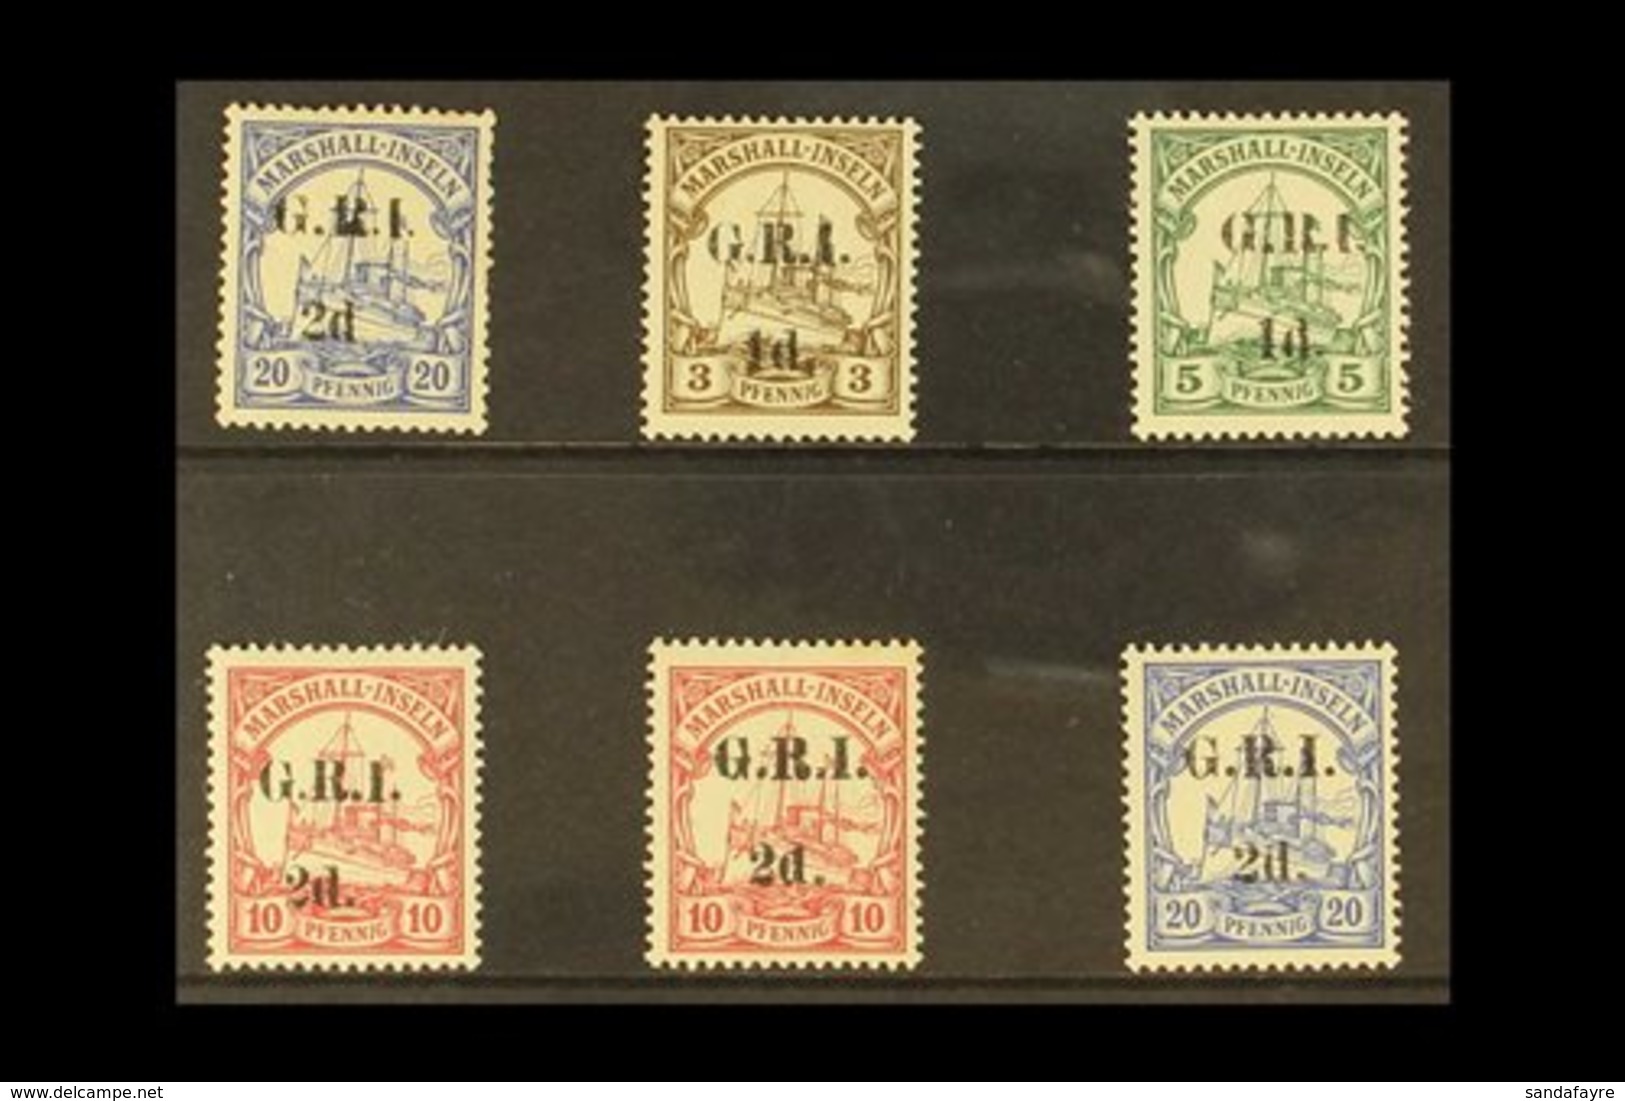 AUSTRALIAN OCCUPATION 1914 FINE MINT Marshall Islands Surcharged Selection, ALL DIFFERENT With Some Overprint Variants & - Papua New Guinea